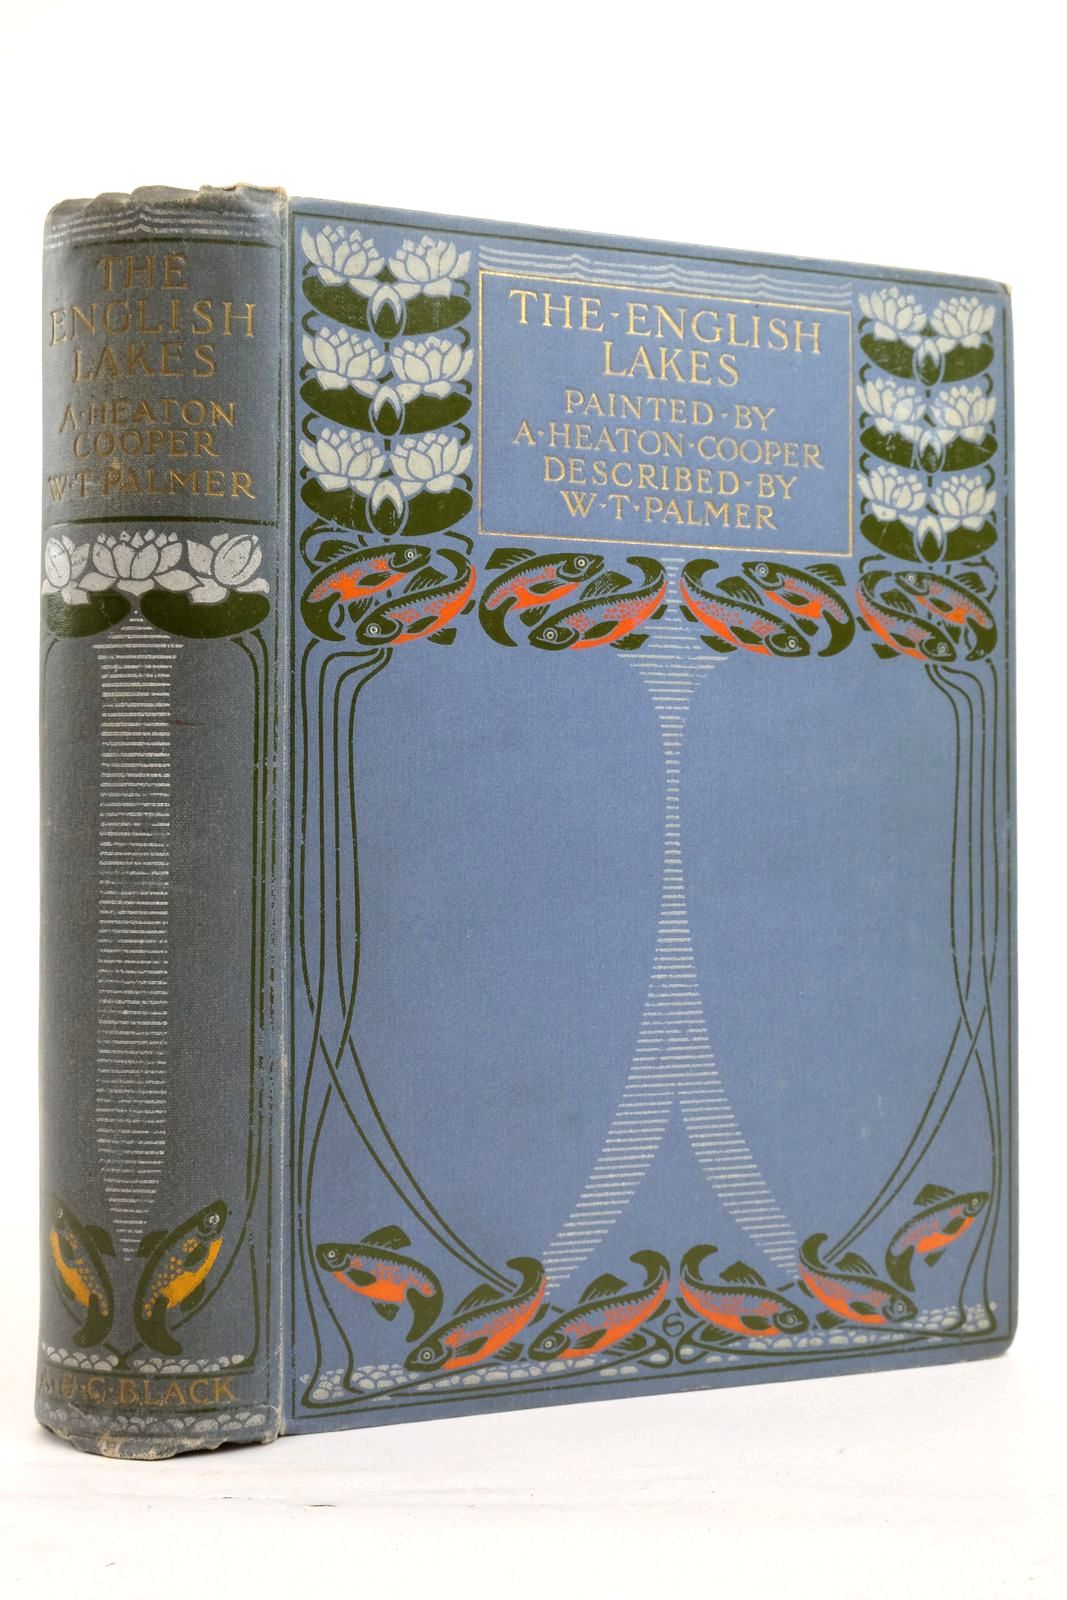 Photo of THE ENGLISH LAKES written by Palmer, William T. illustrated by Cooper, A. Heaton published by Adam & Charles Black (STOCK CODE: 2137224)  for sale by Stella & Rose's Books